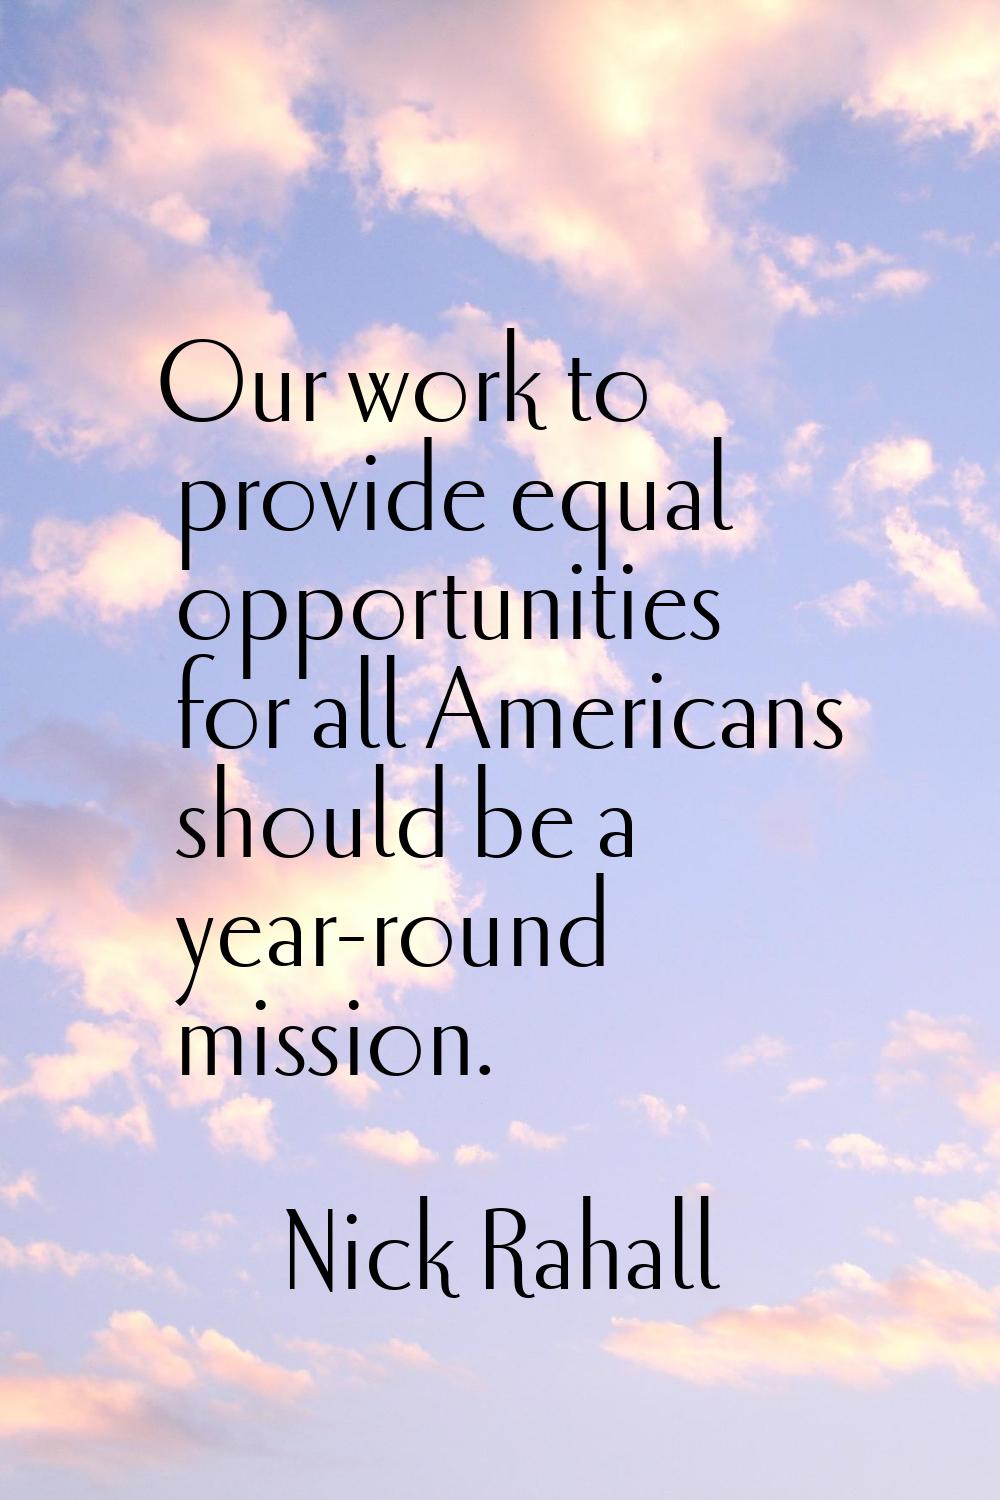 Our work to provide equal opportunities for all Americans should be a year-round mission.